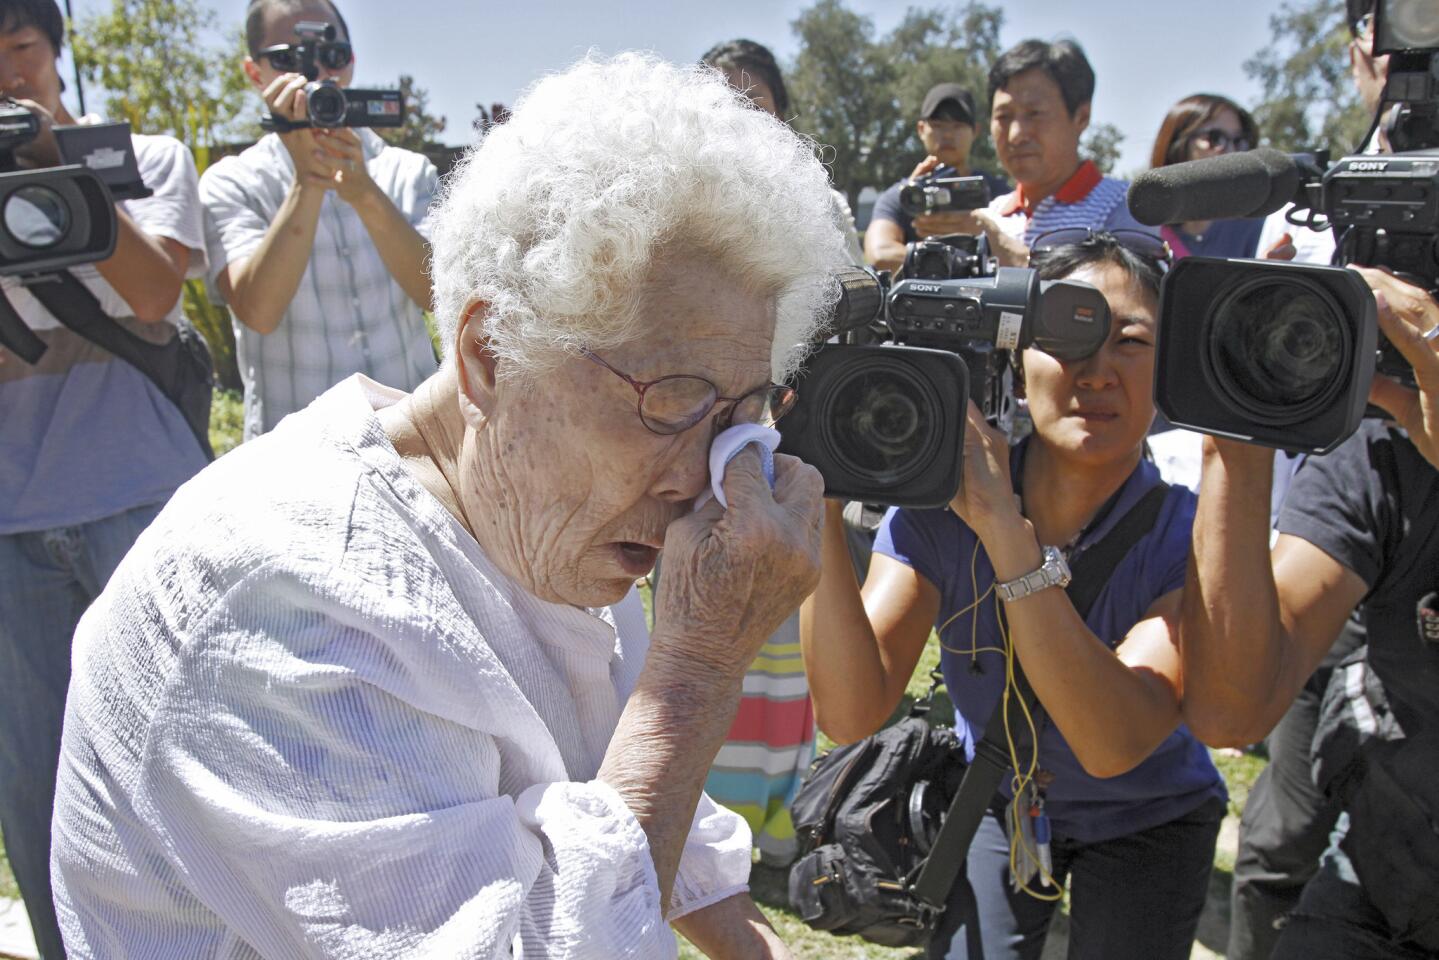 Former Japanese Imperial army sex slave Ok-Seon Lee, 87, wipes tears away after visiting the Peace Monument dedicated to comfort women at Central Park in Glendale on Thursday, July 24, 2014. The Korean woman was used as sex slave during World War II by the Japanese army.